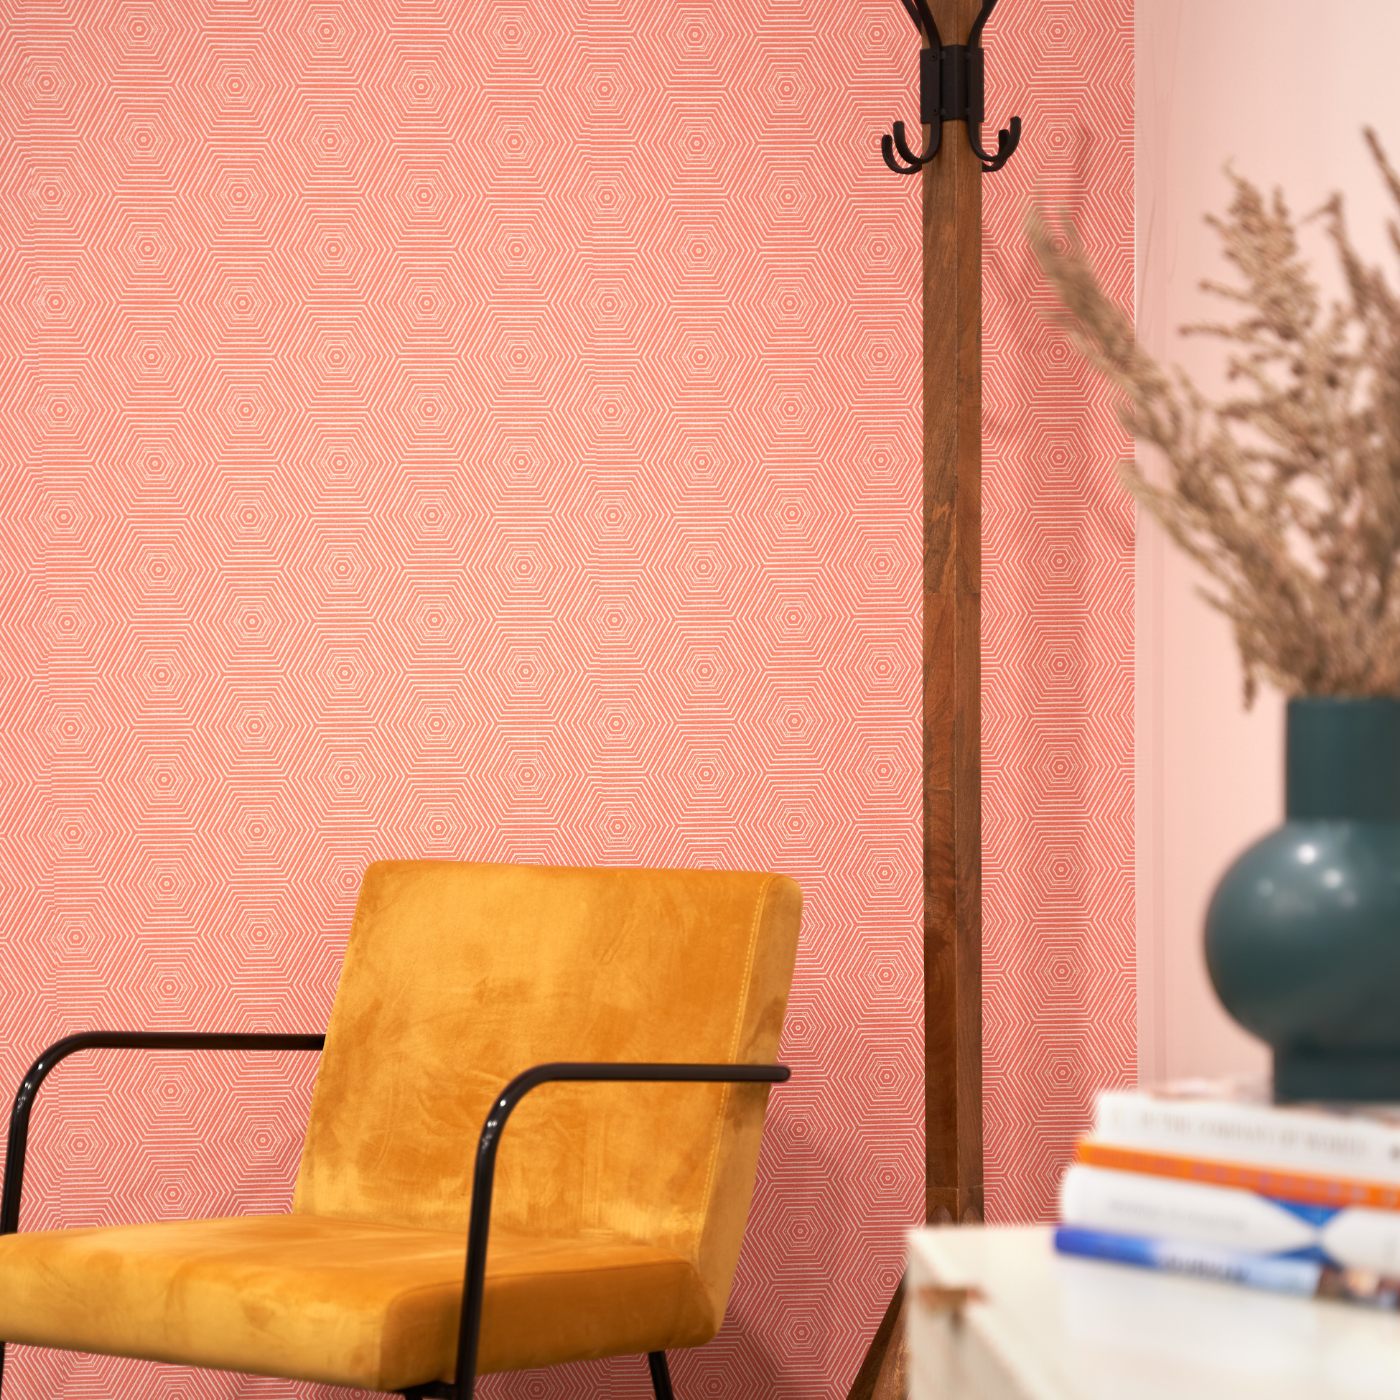 A yellow velvet chair sits in the corner in the apex of two walls with pink wallpaper that has a design featuring rows of interconnected small white geometric shapes. Behind the chair is a wooden coat rack and along the wall to the right is a white bookshelf with a dark blue planter on top and dried flowers coming out of it on it as well as a stack of books.